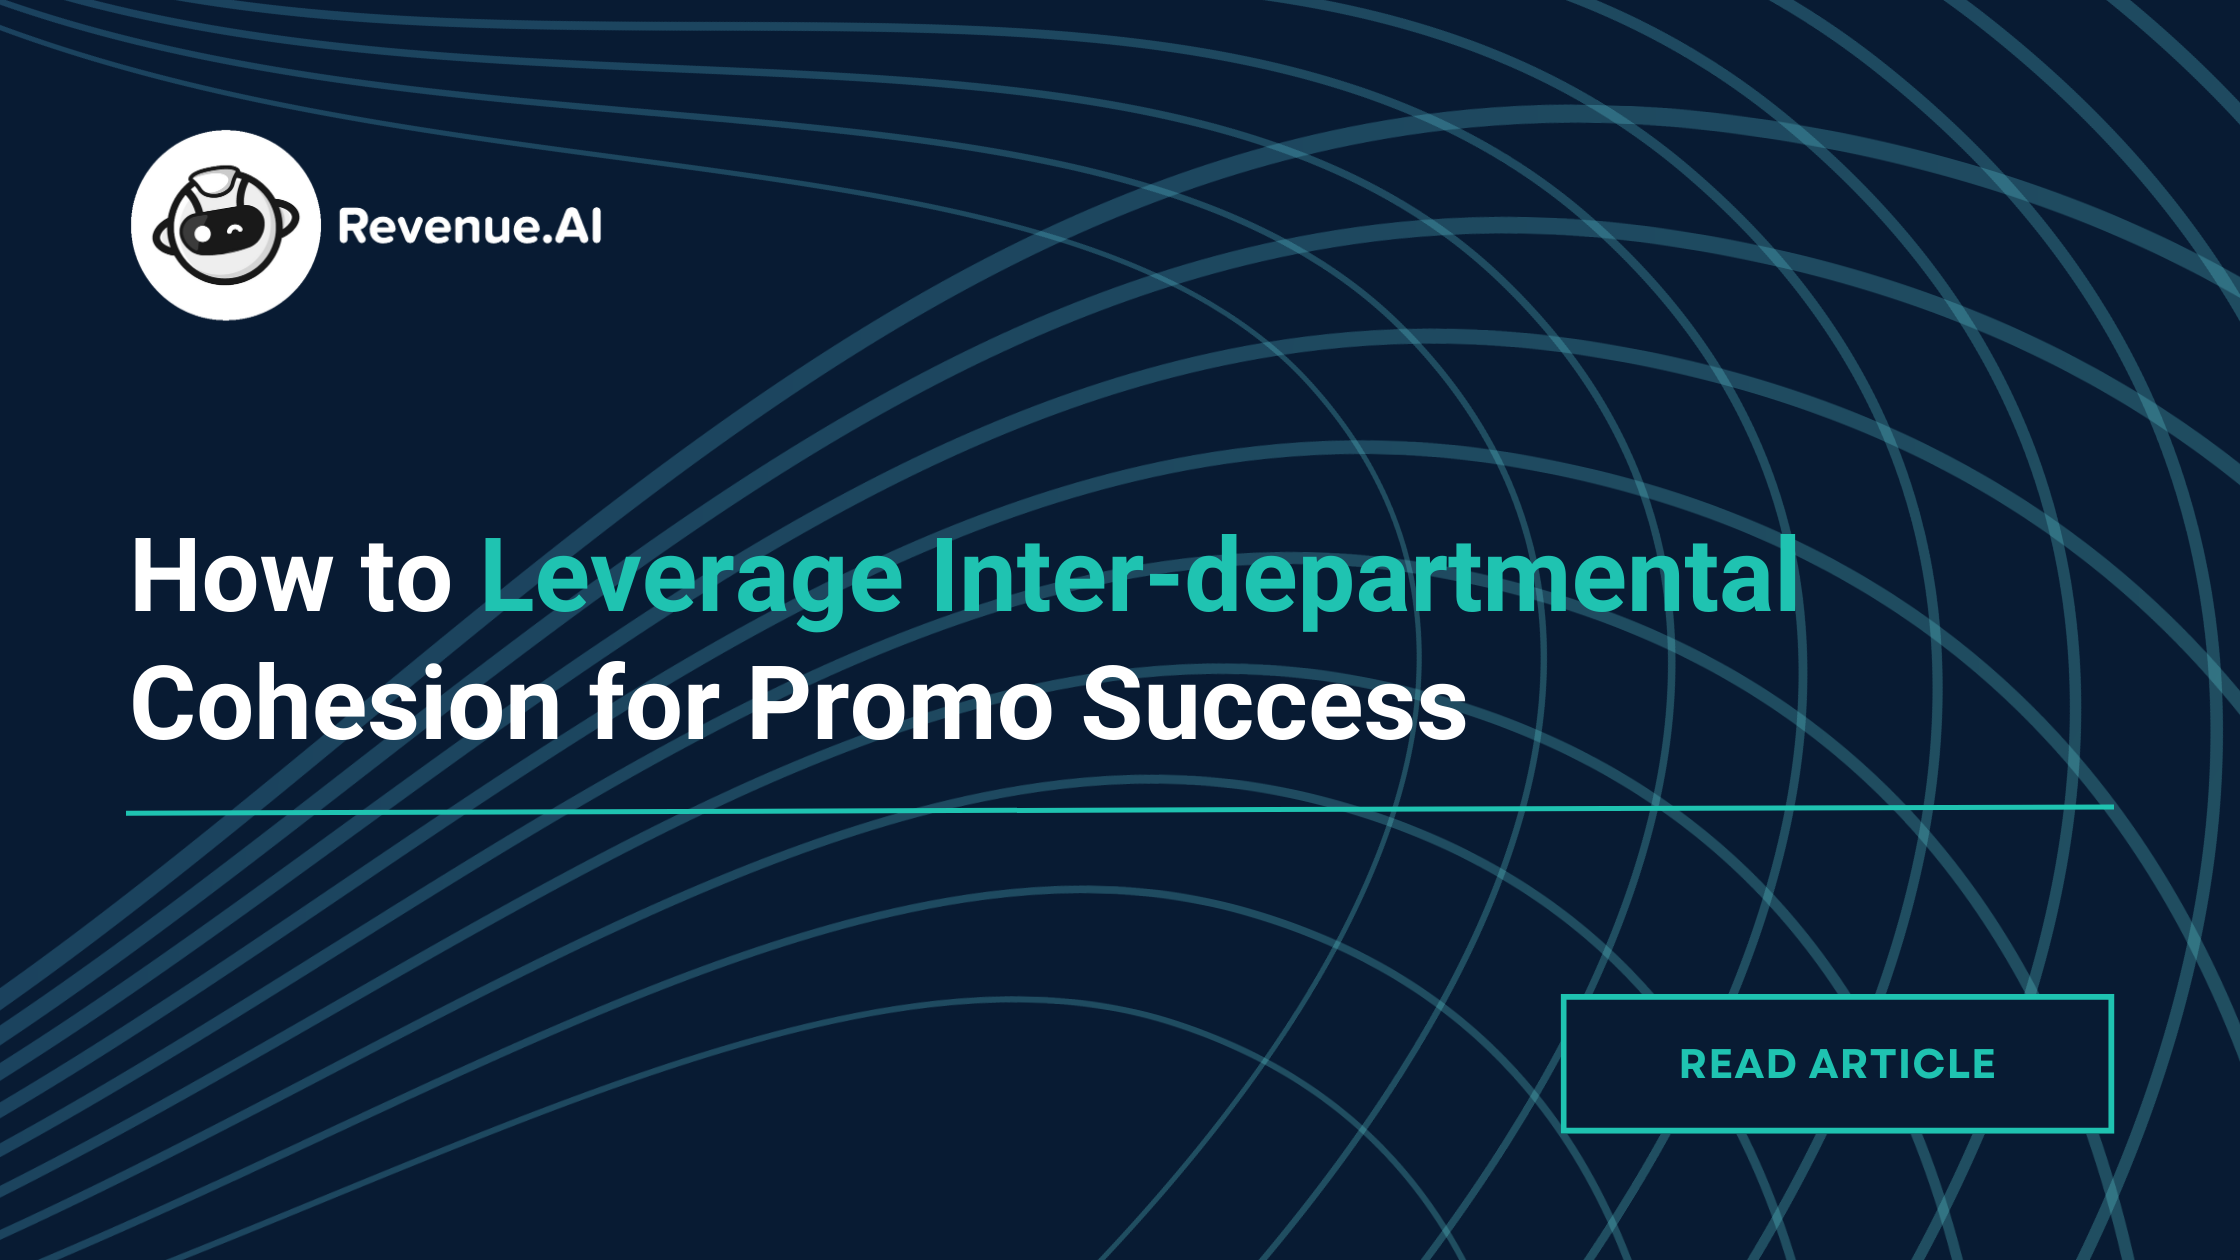 How to Leverage AI-driven Inter-departmental Cohesion for Promo Success